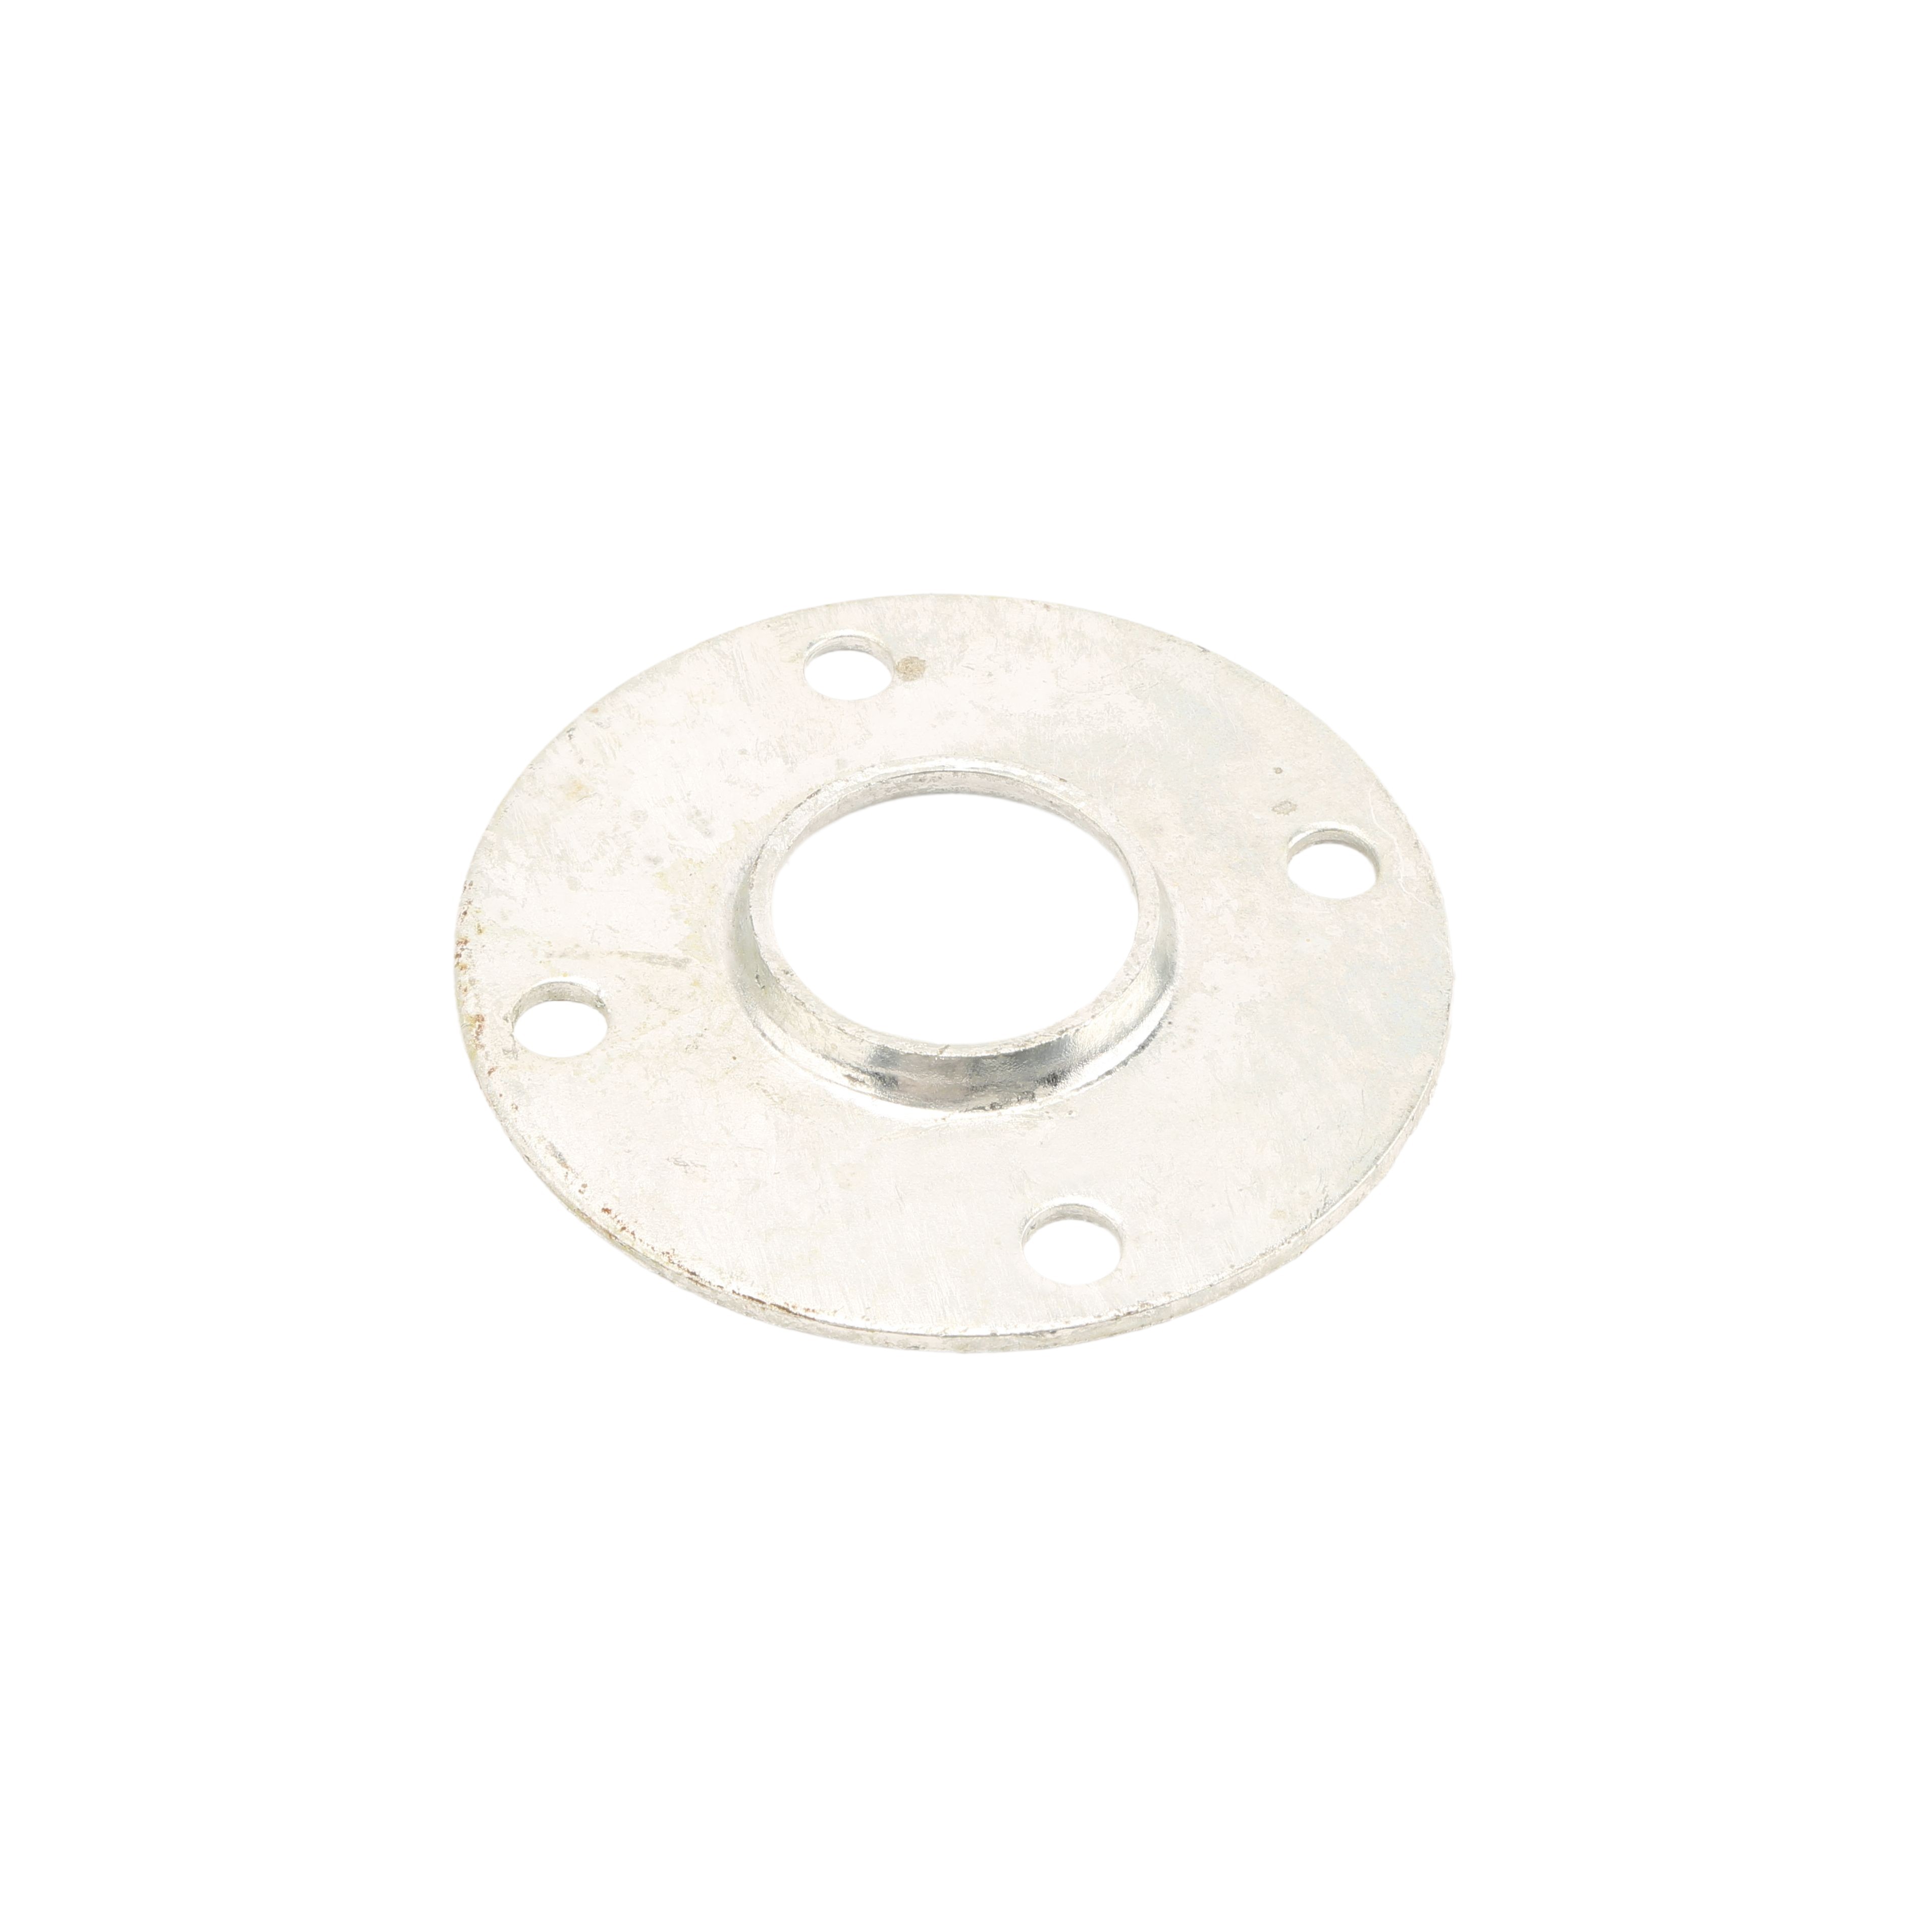 Chain Link 2 [1 7/8 OD] Weldable Surface Mount Floor Flange